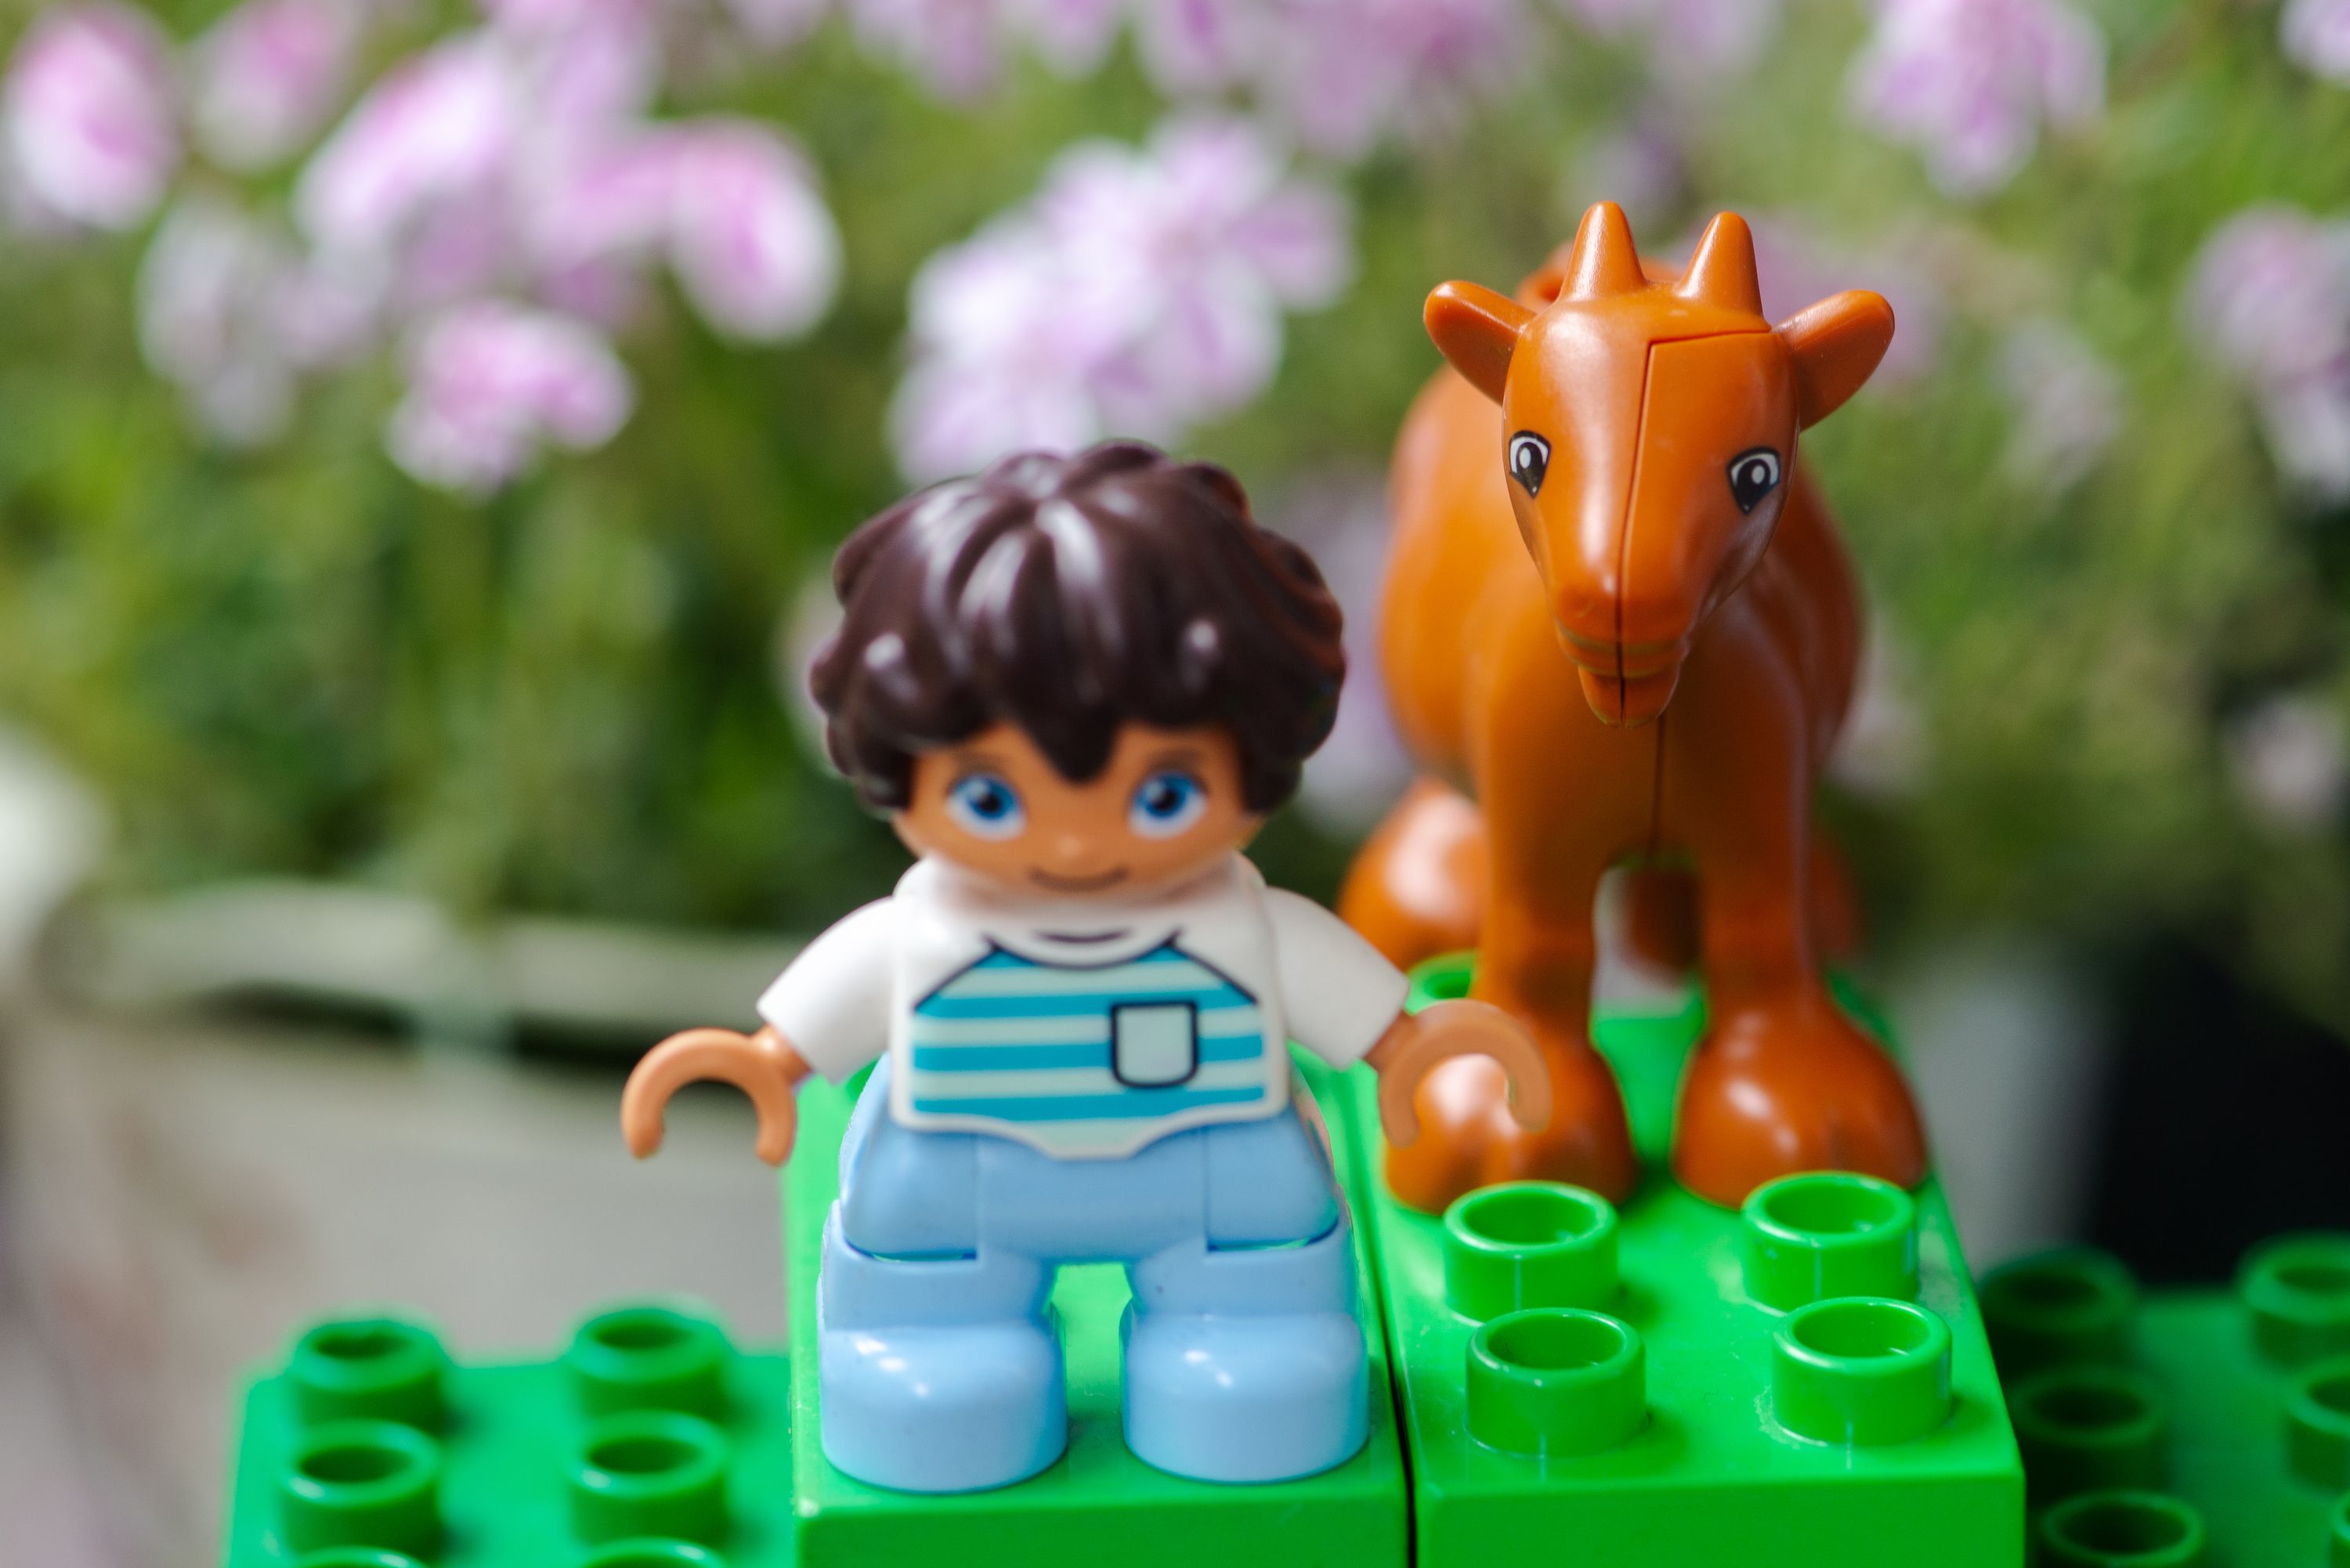 Lego Duplo goat mini figure with a child with flowers in the background